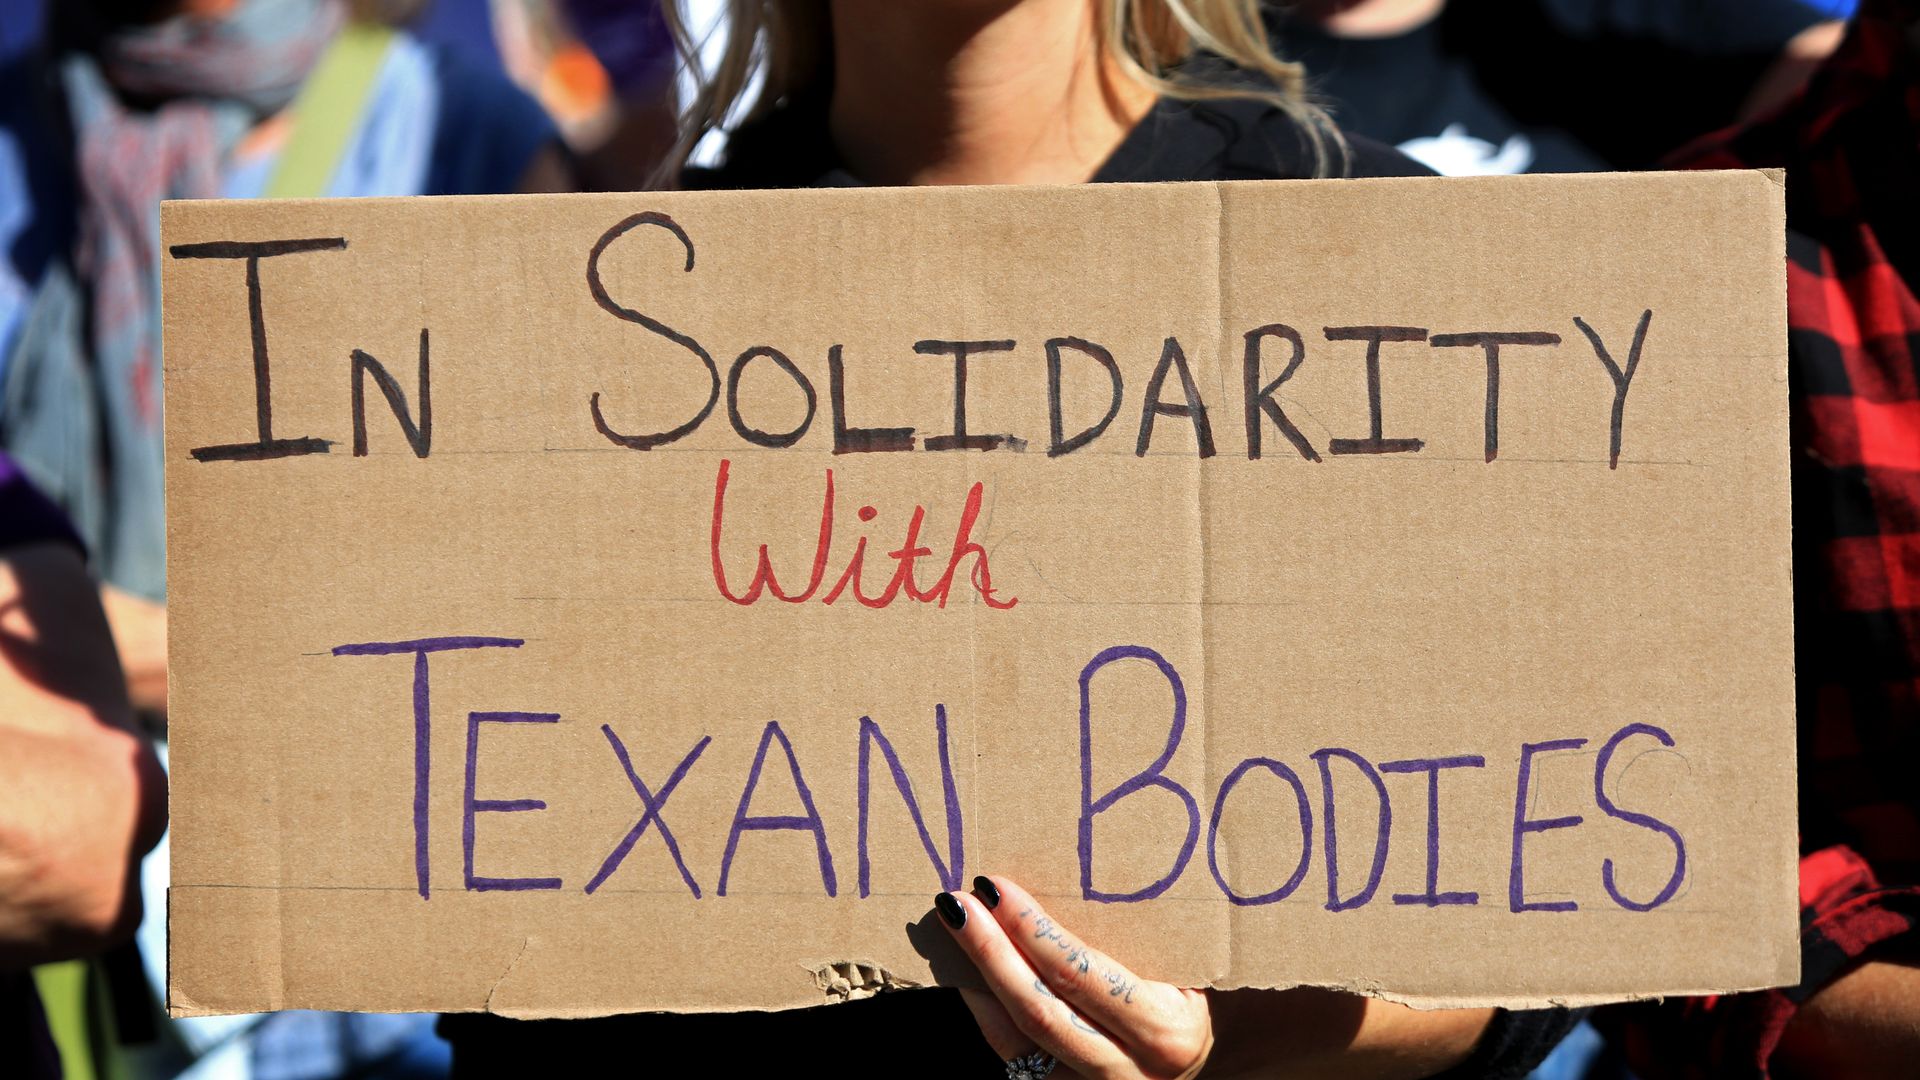 Photo of a person holding a sign that says "in solidarity with Texan bodies"